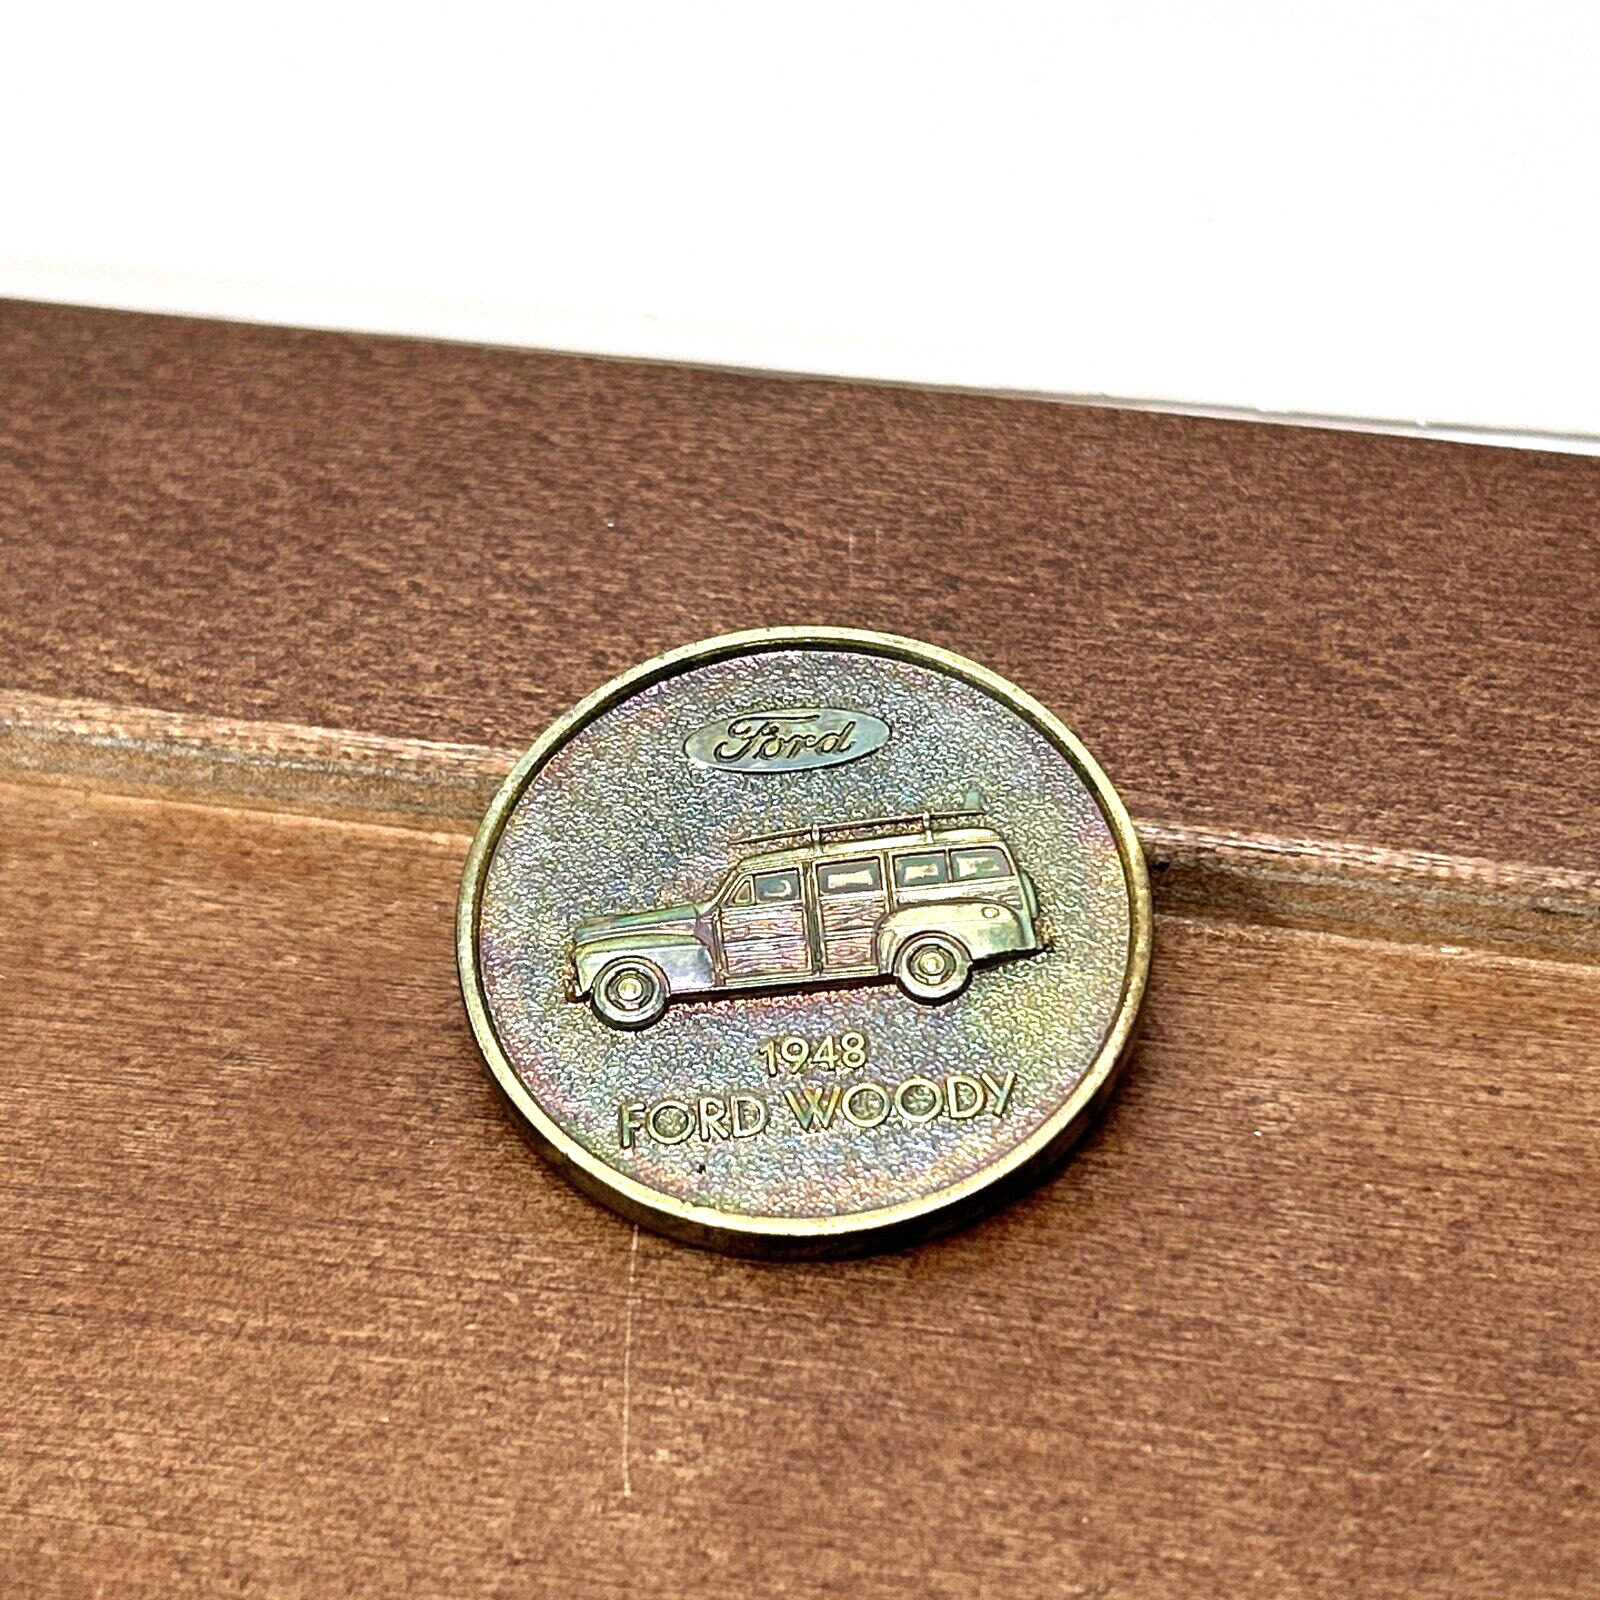 Ford 1948 Woody Road Signature Series Metal Coin